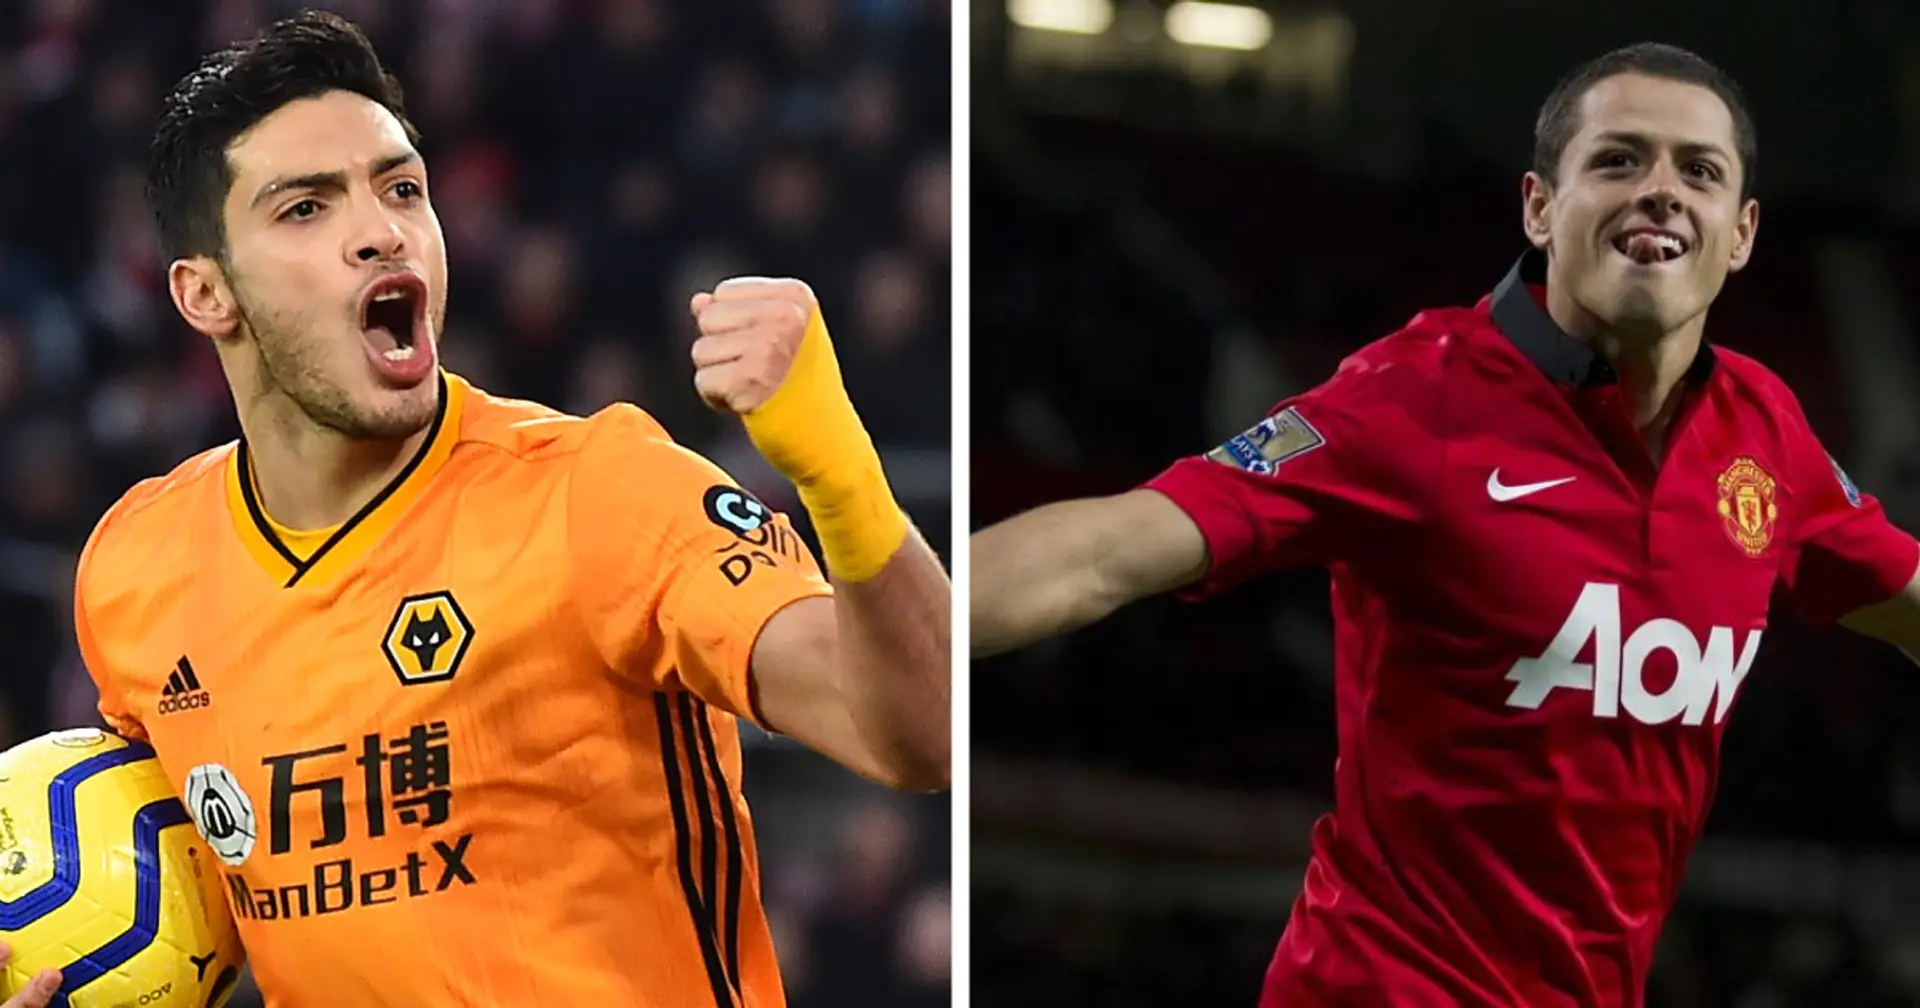 🙏 WEDNESDAY WISH: Would you like to see United sign Raul Jimenez and use him as an impact sub like Chicharito?